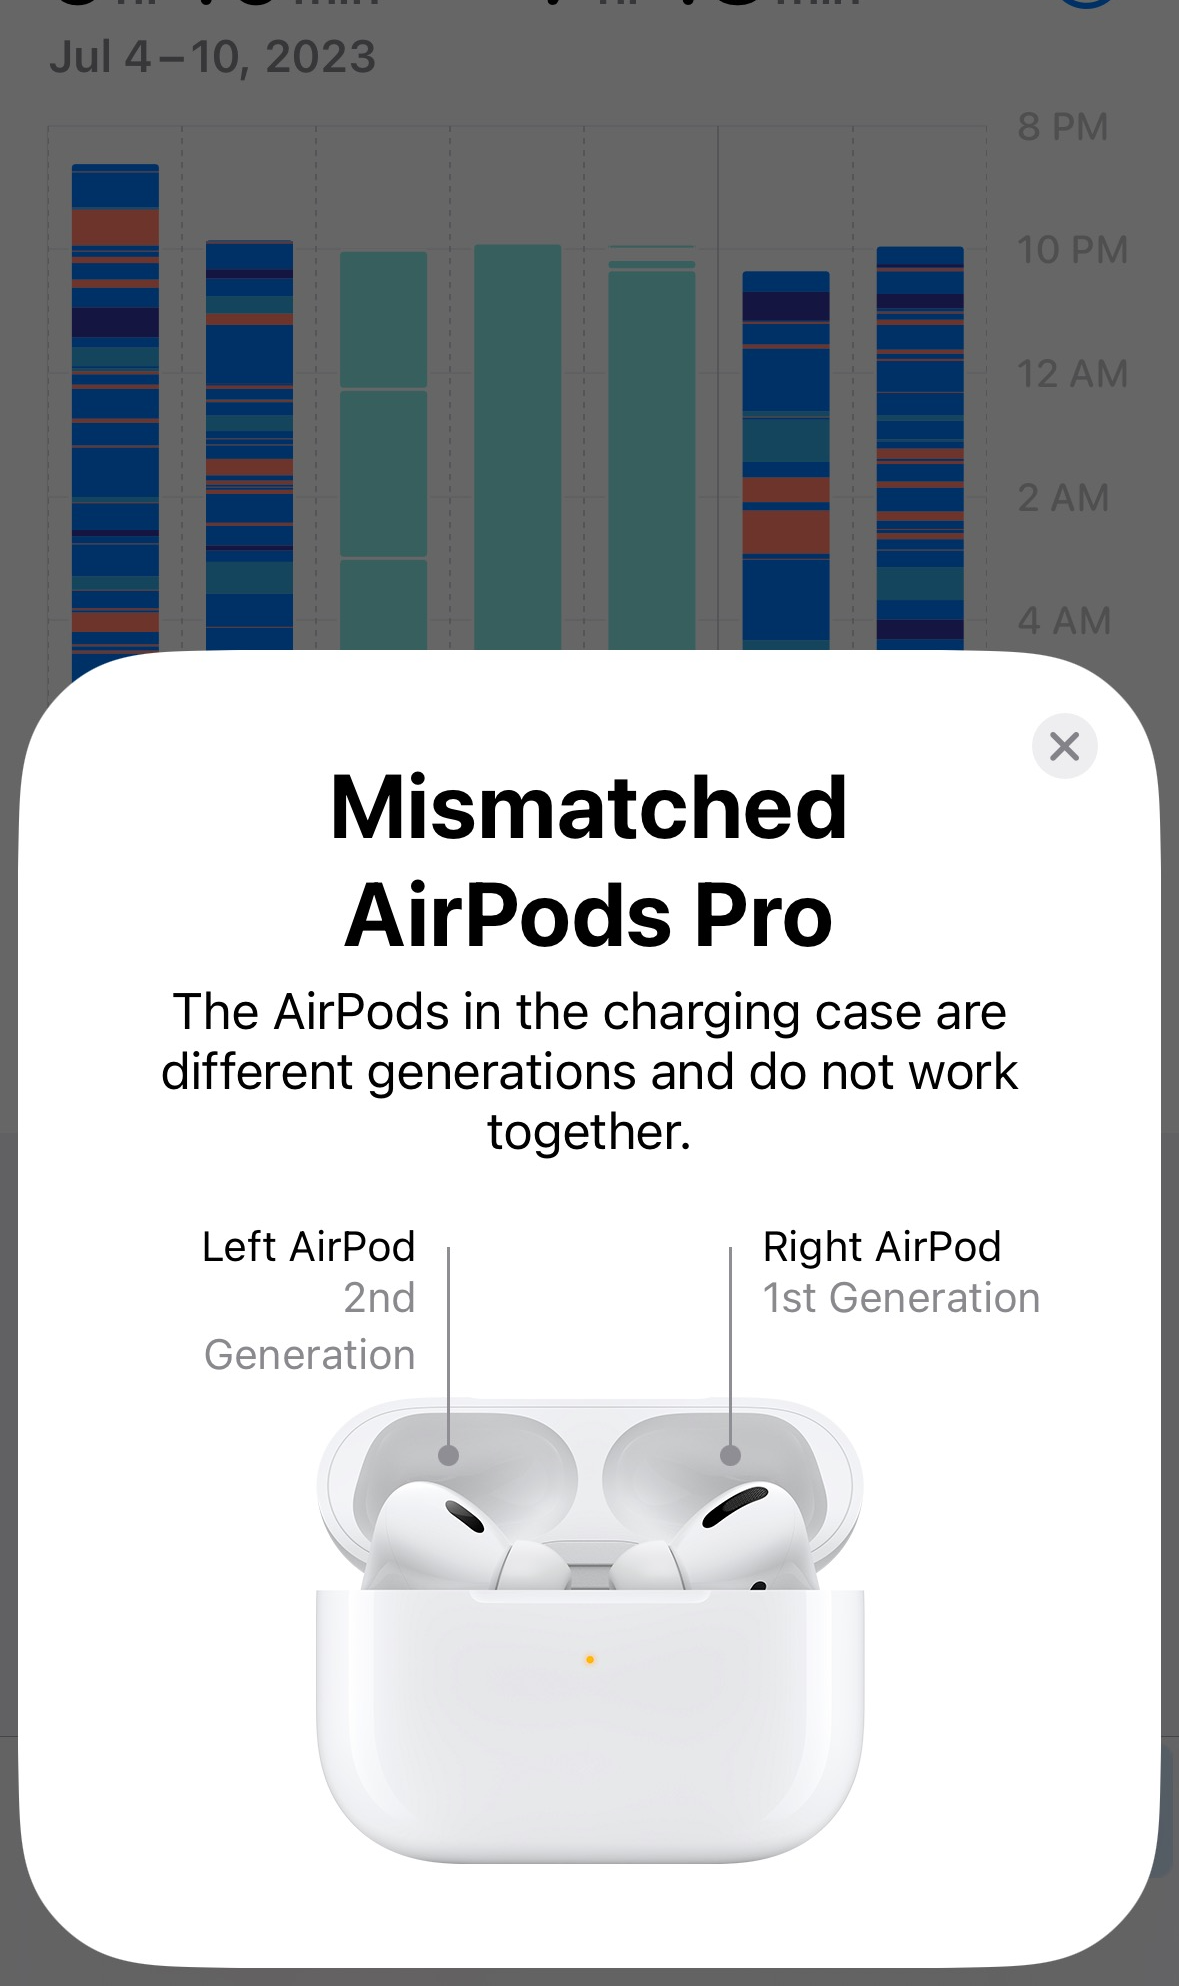 Peter's mismatched AirPods Pro case